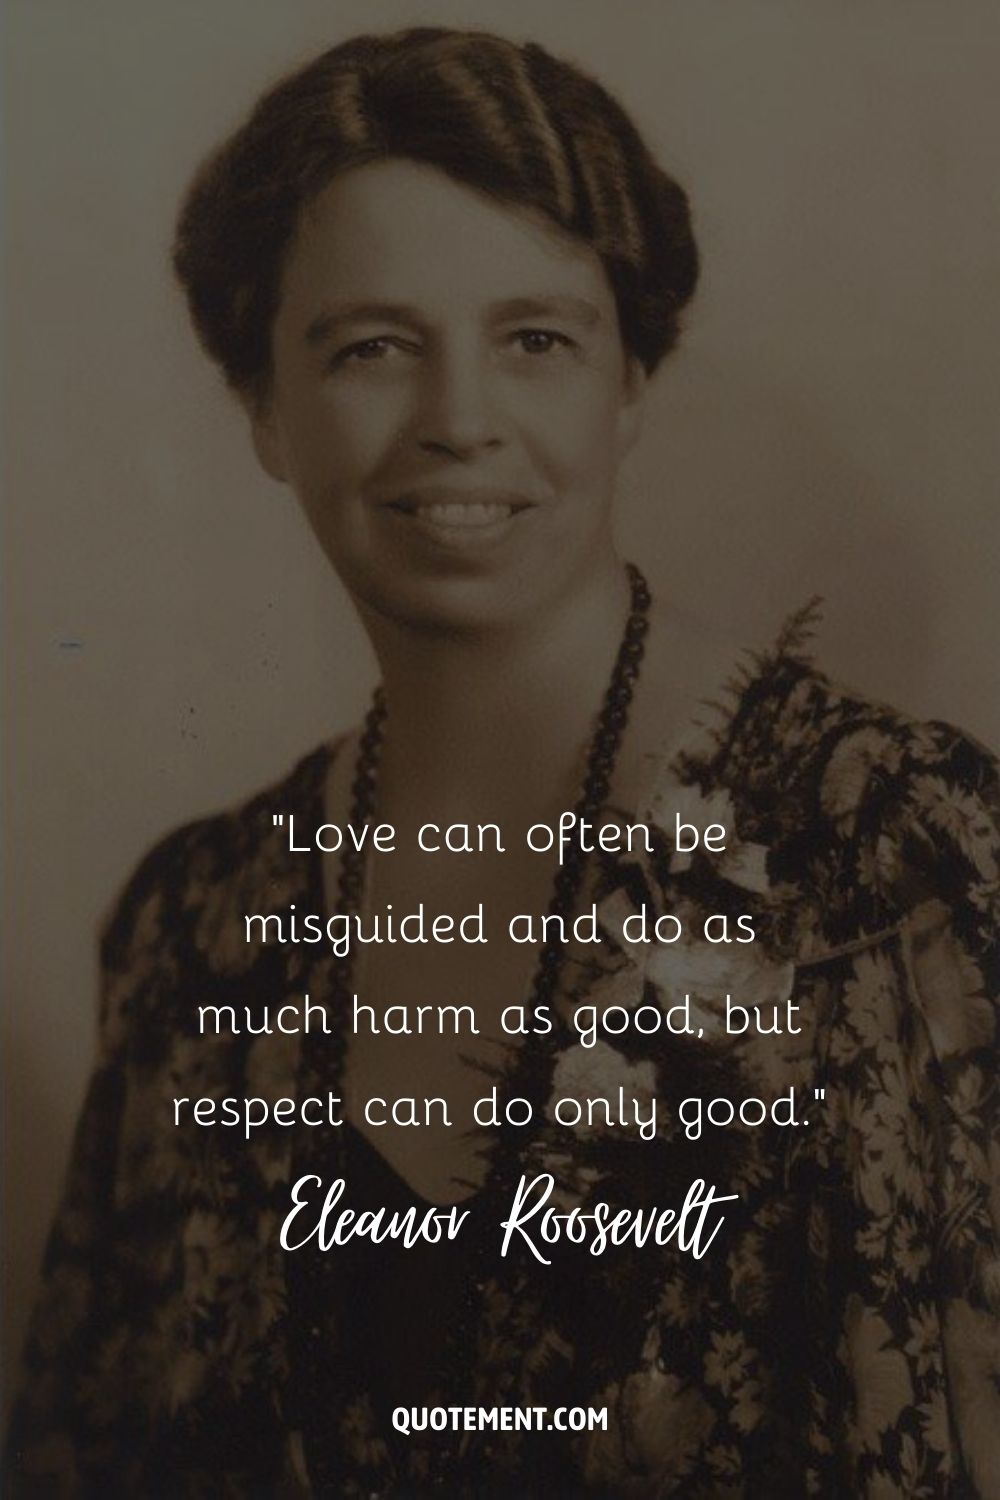 Love can often be misguided and do as much harm as good, but respect can do only good.